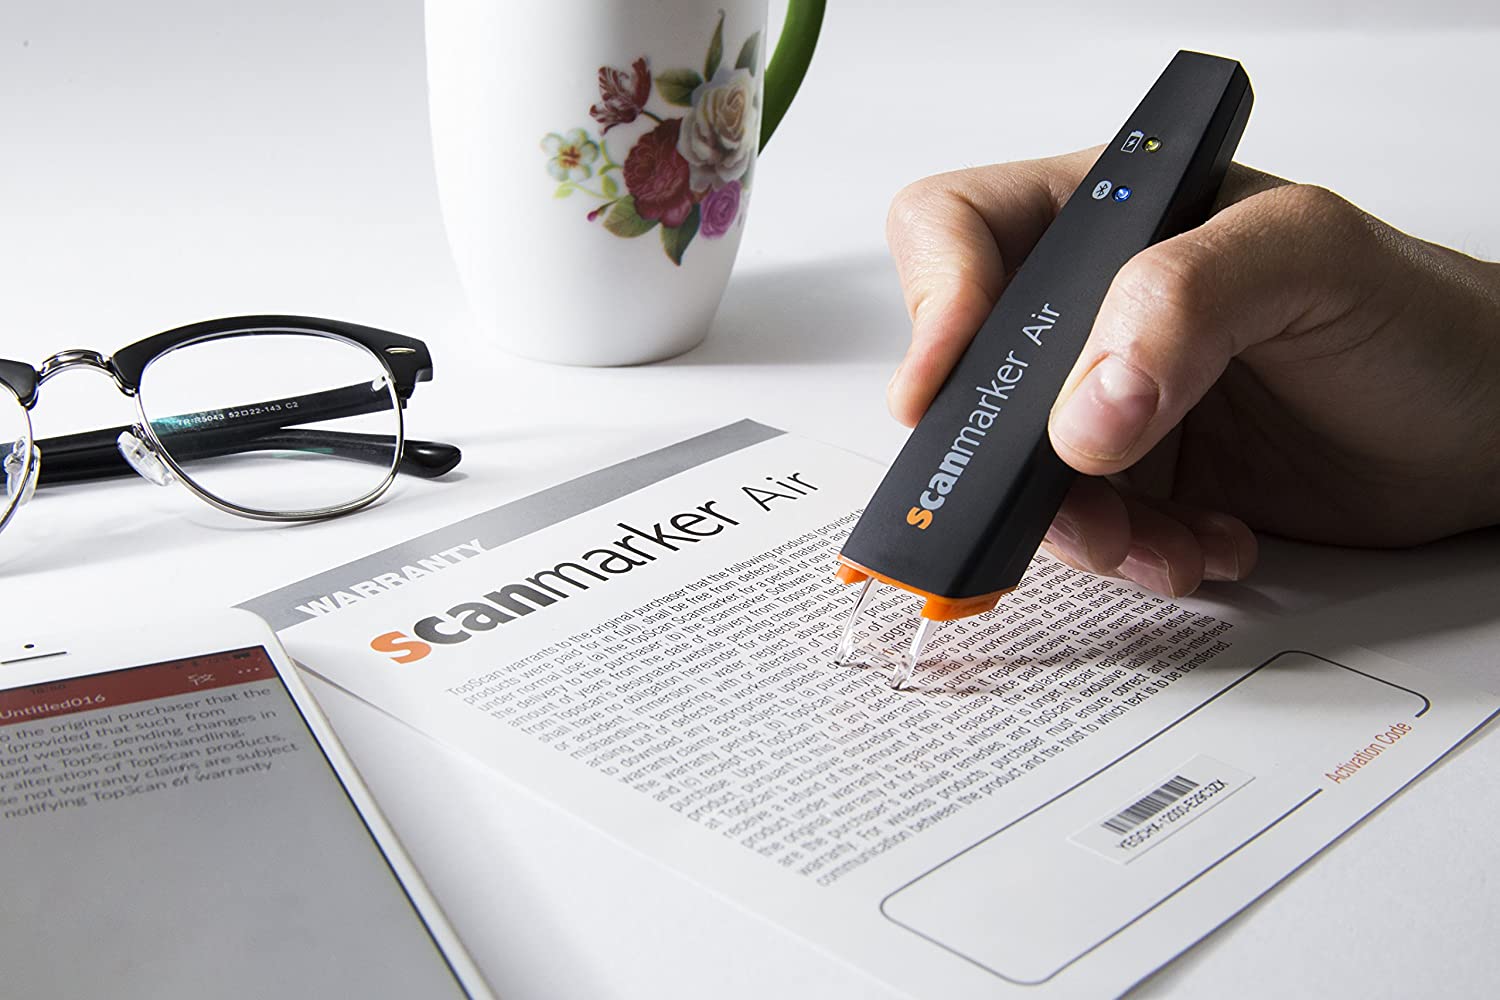 Forget Highlighters, This Handheld Pen Scanner Takes Notes Digitally And Uploads Them To Your Phone